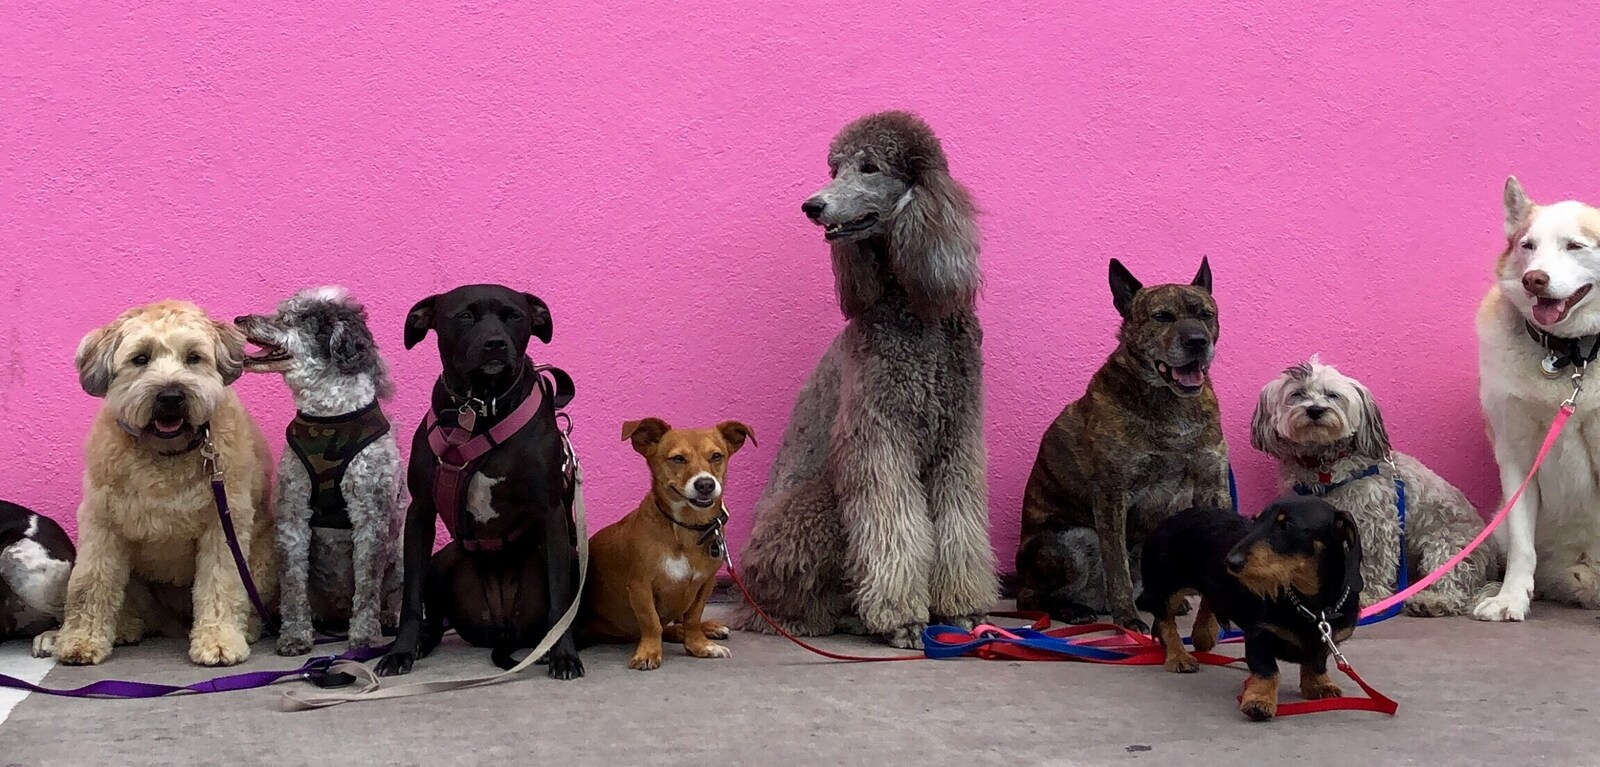 Group of dogs against a pink wall